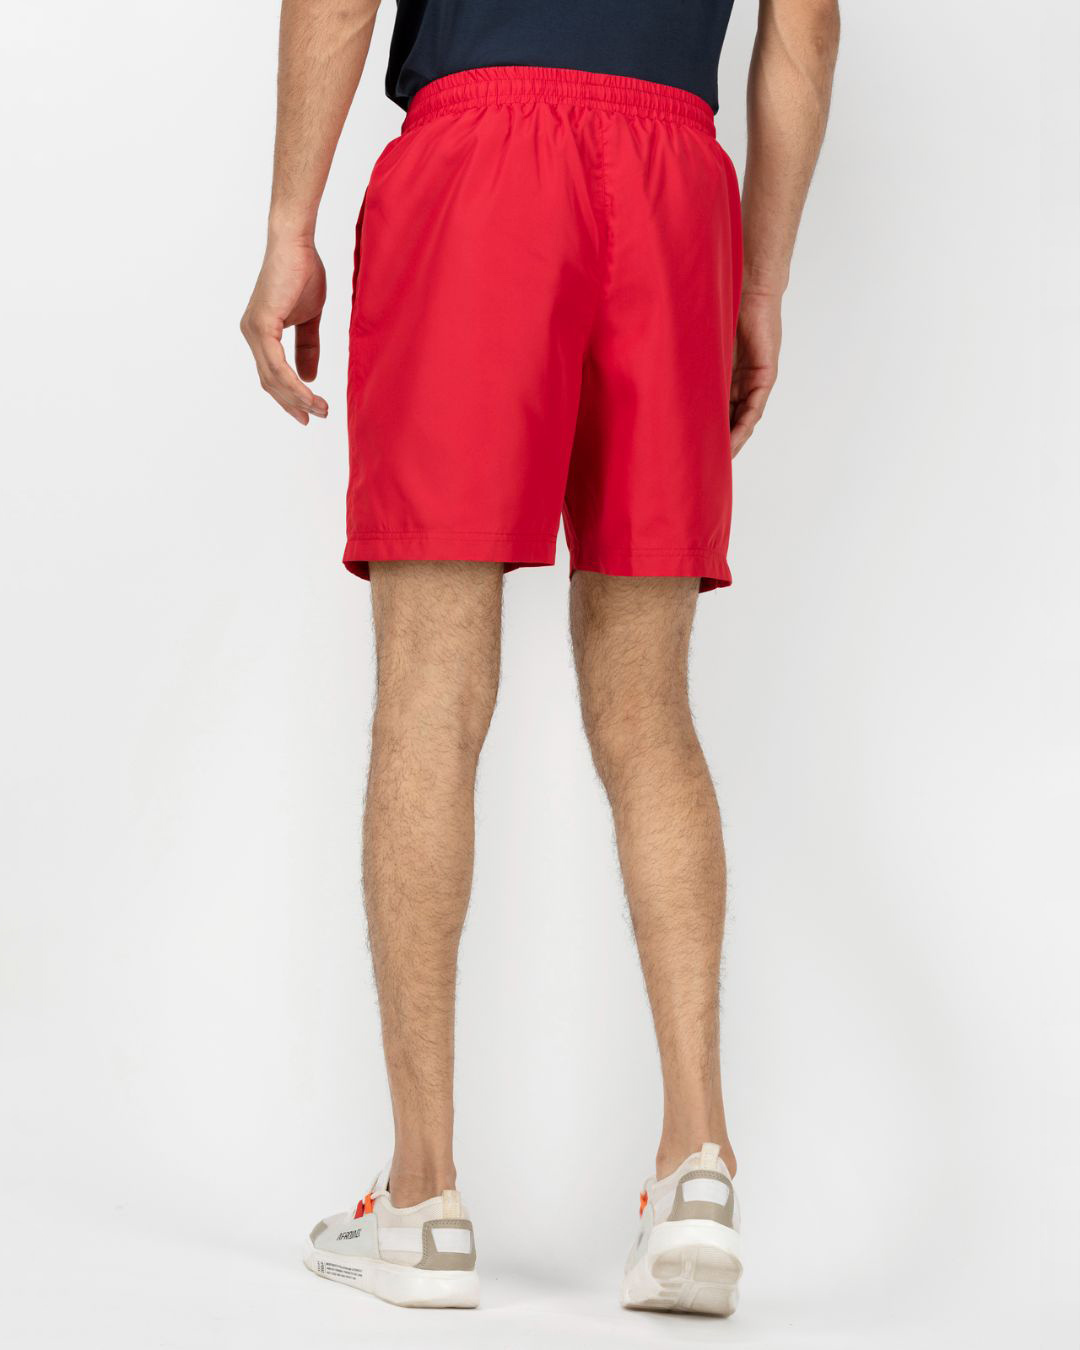 Shop SOC Red Power Shorts Rapid Dry EXPLORE-Back